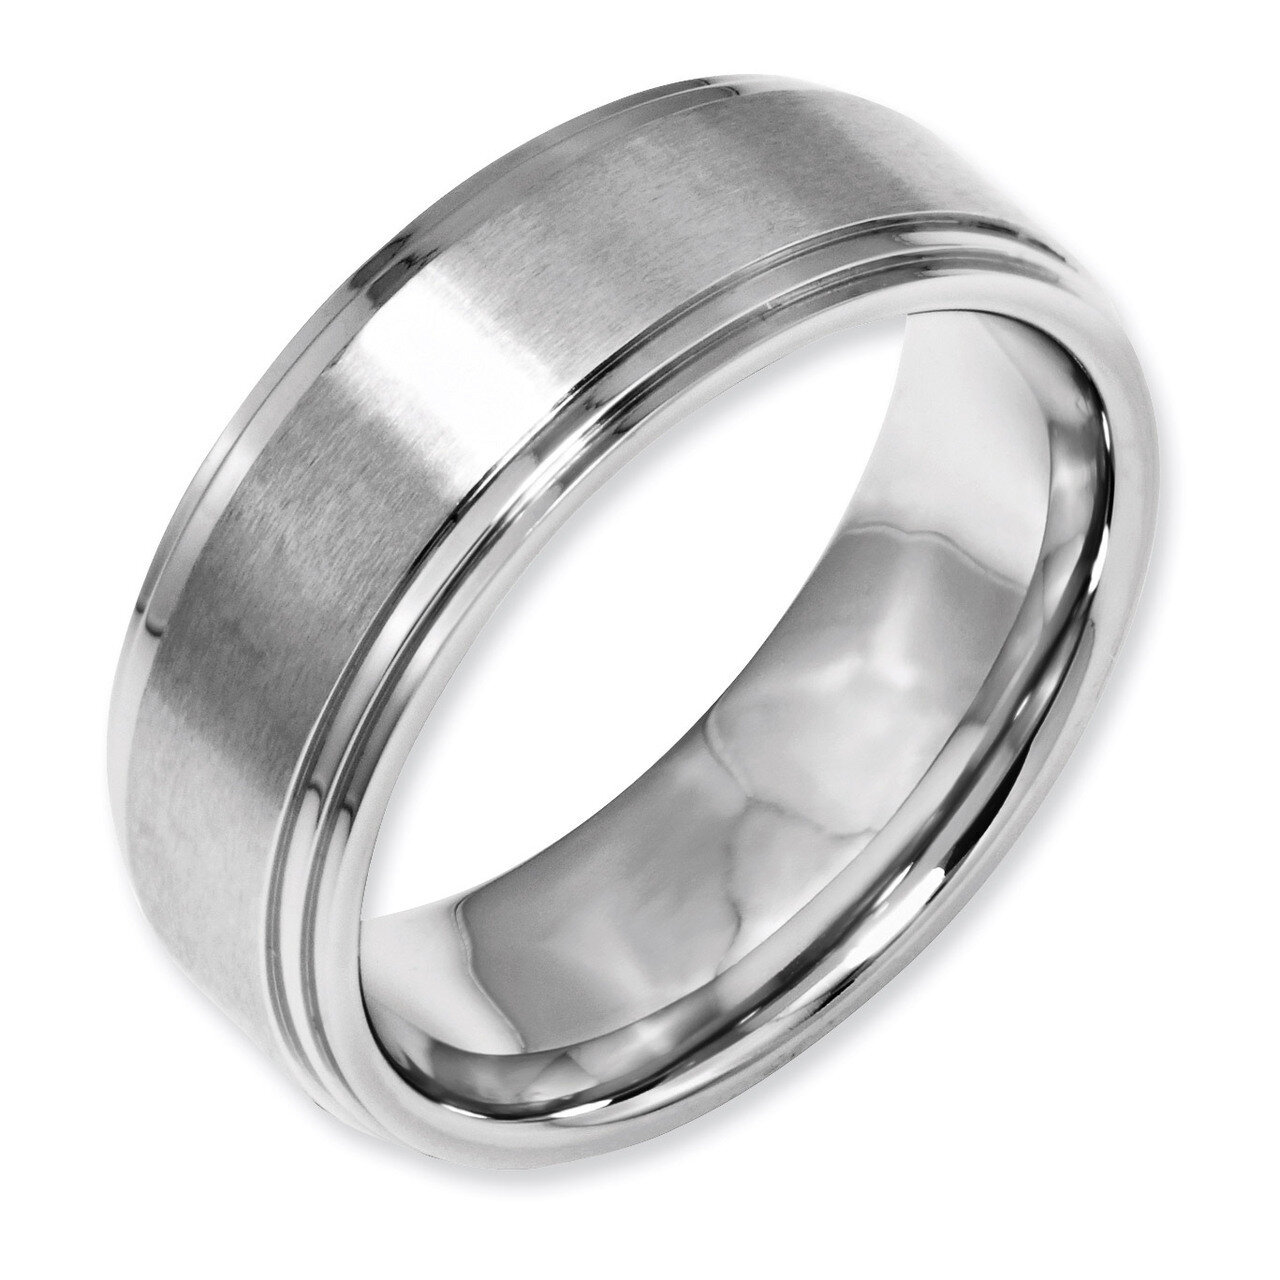 Ridged Edge 8mm Brushed and Polished Band - Stainless Steel SR24